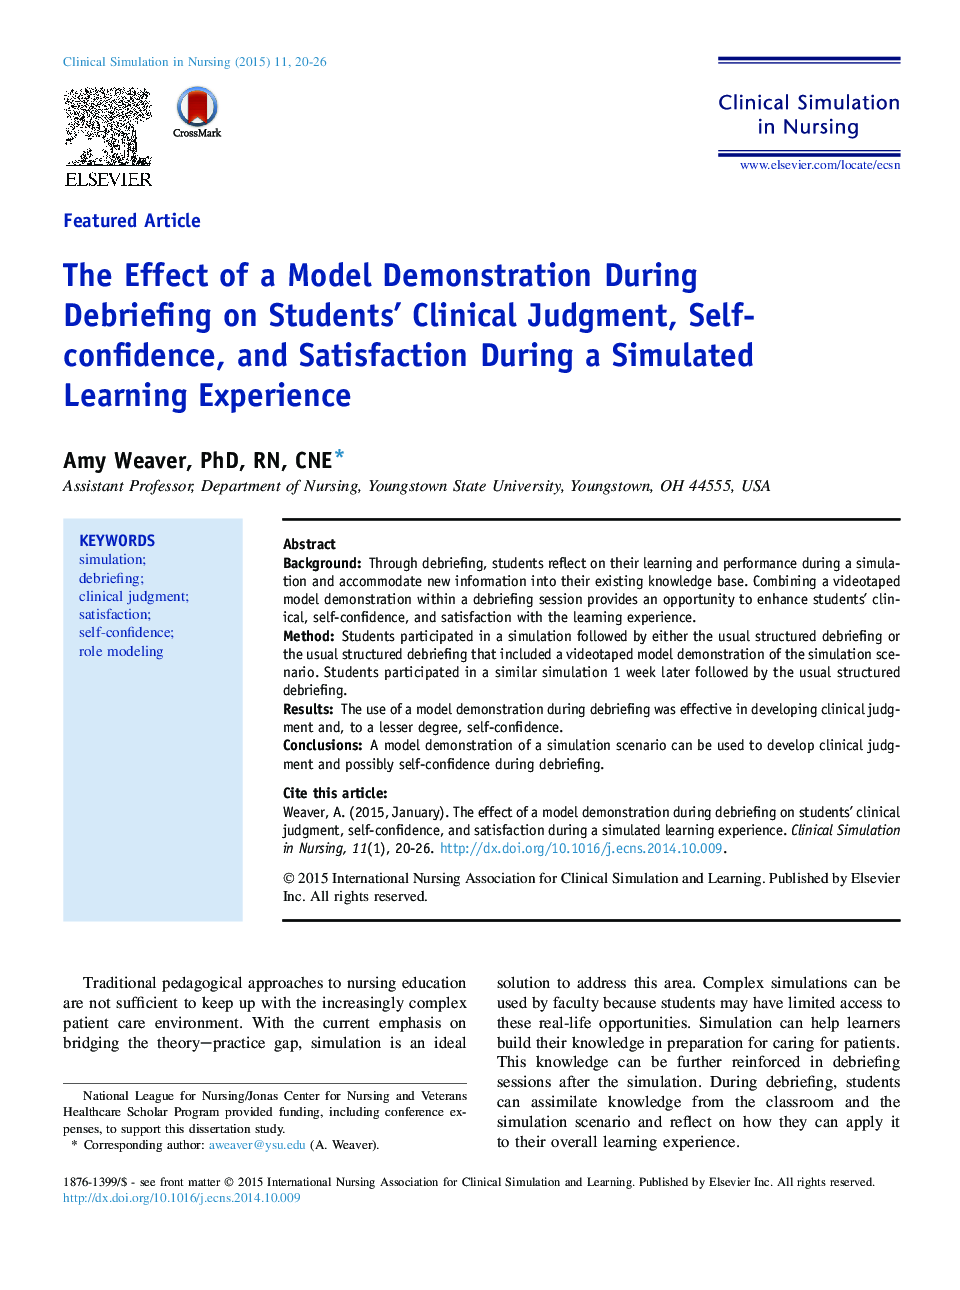 The Effect of a Model Demonstration During Debriefing on Students' Clinical Judgment, Self-confidence, and Satisfaction During a Simulated Learning Experience 